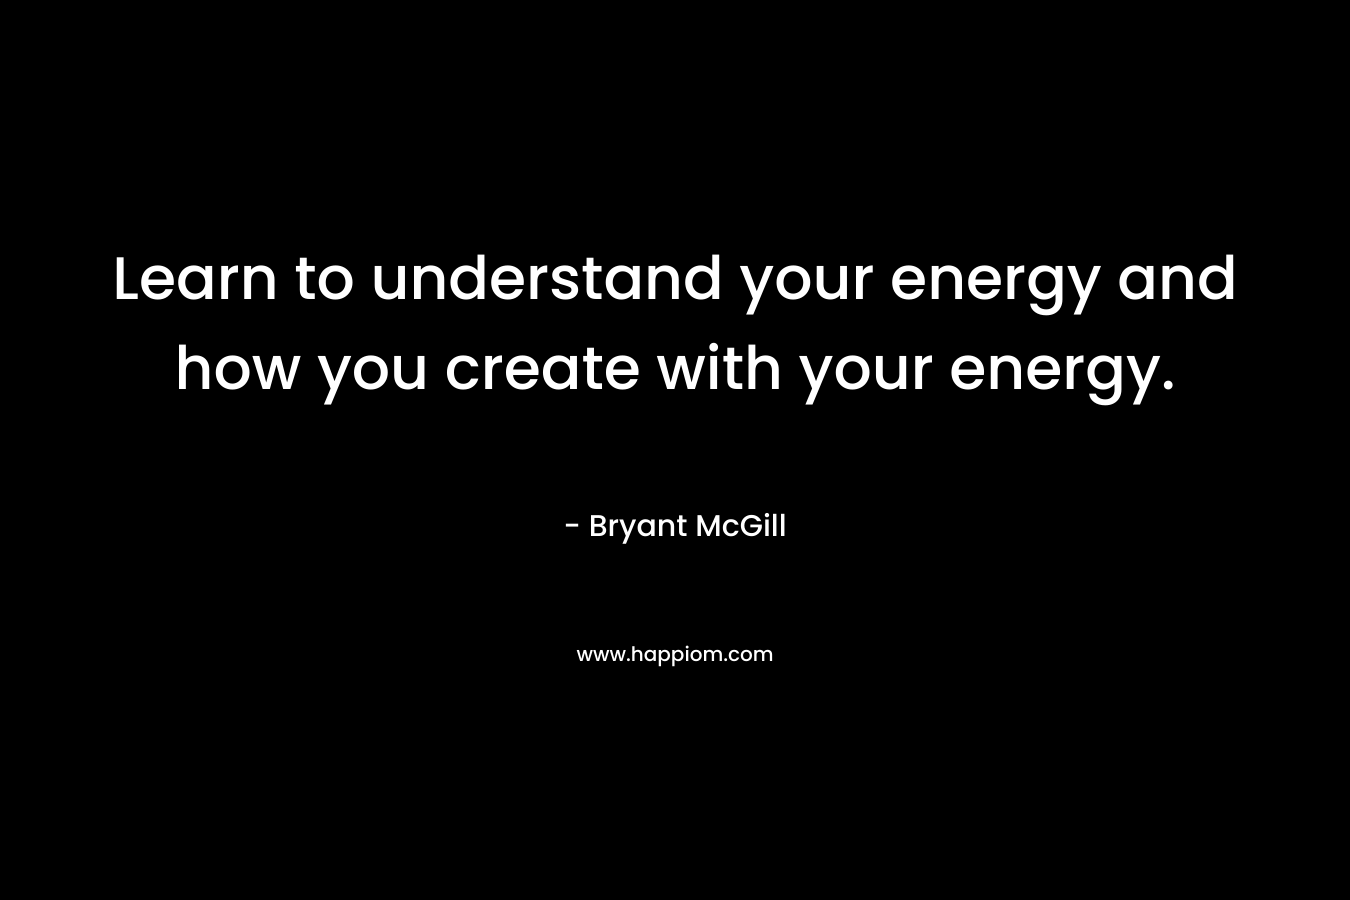 Learn to understand your energy and how you create with your energy.